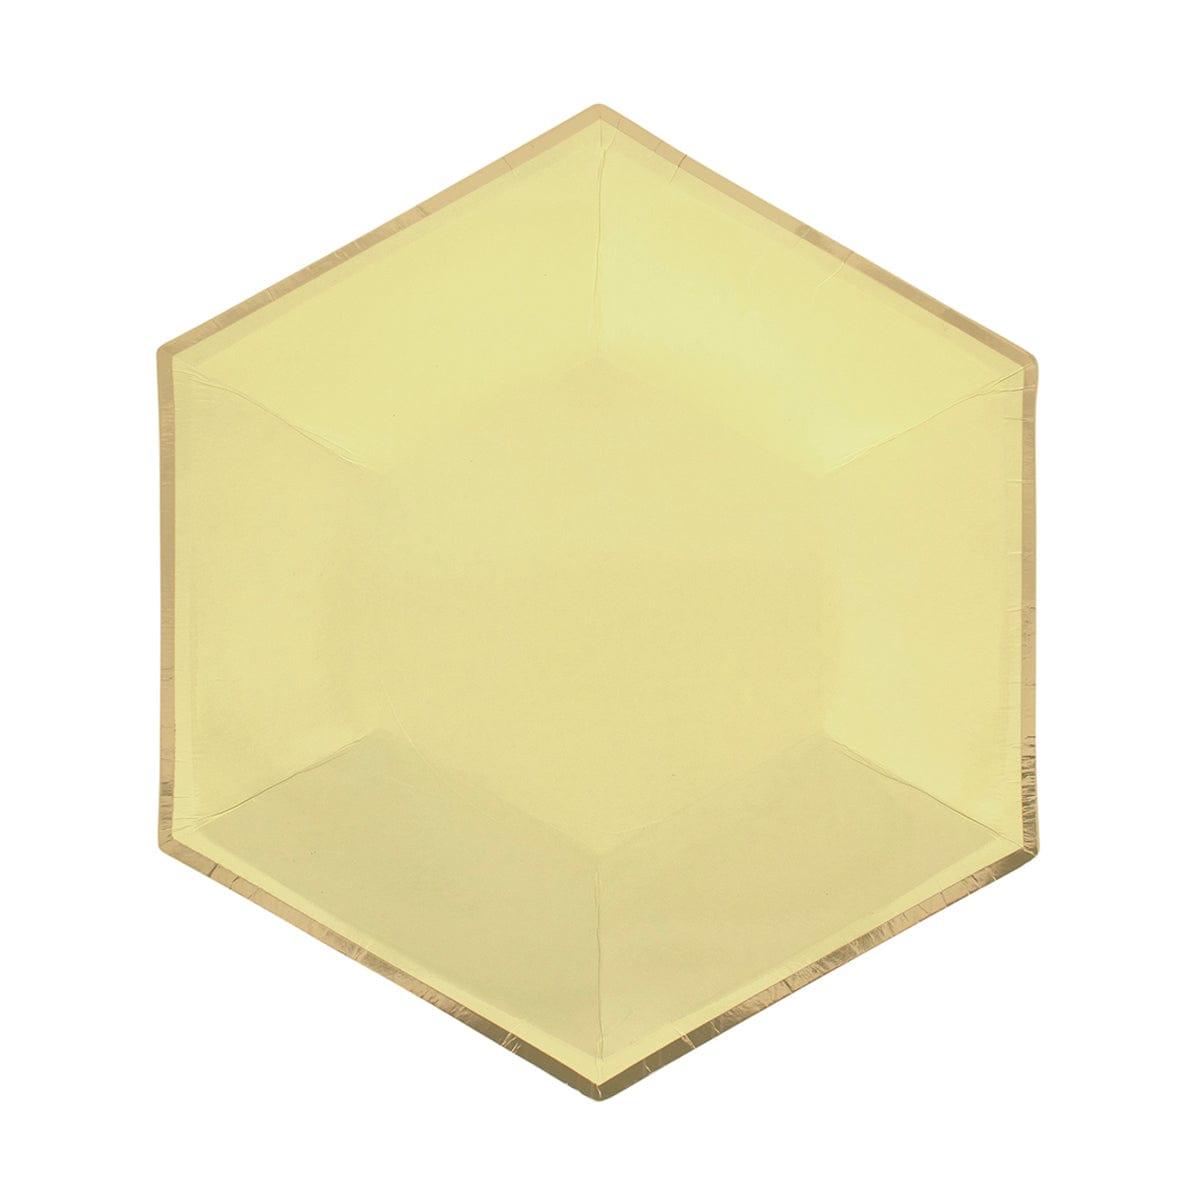 YIWU SANDY PAPER PRODUCTS CO., LTD Everyday Entertaining Hexagon Yellow Plates, 7 Inches, 8 Count